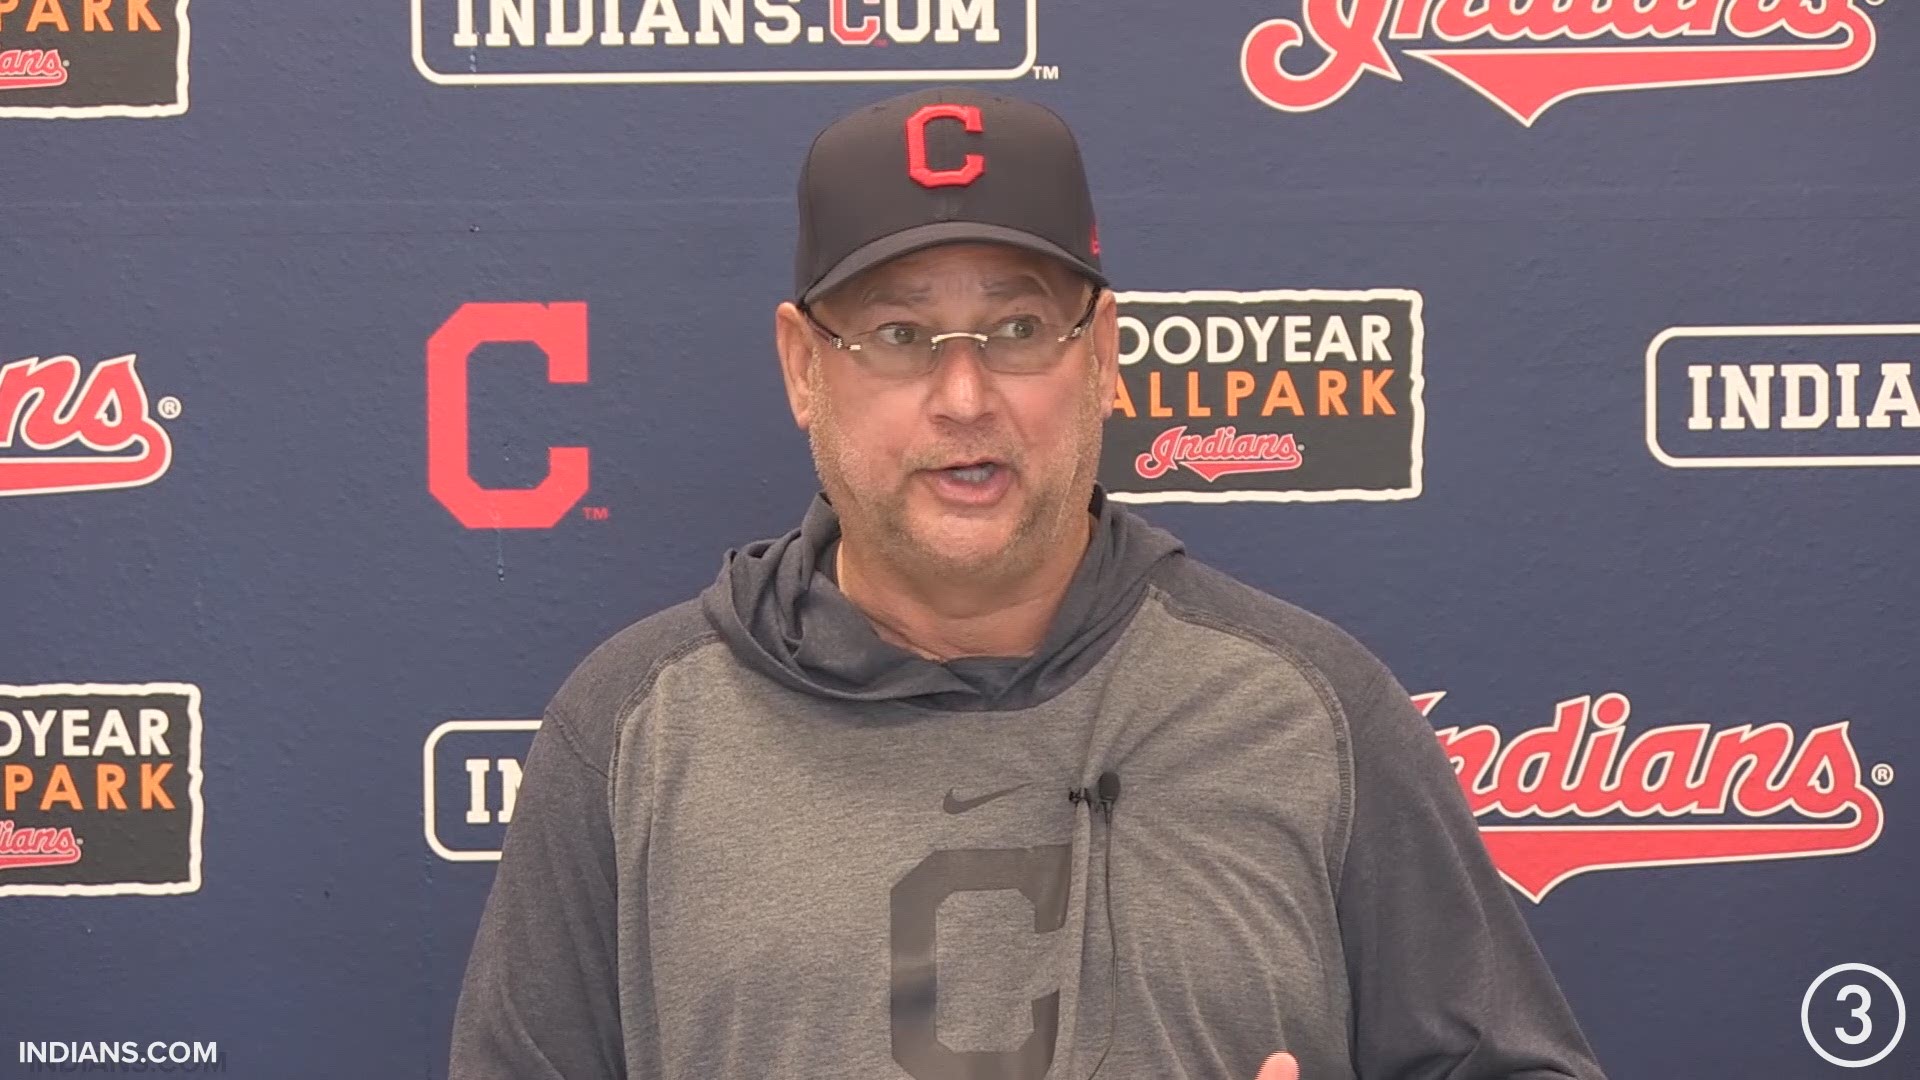 Speaking to reporters in Goodyear, Cleveland Indians manager Terry Francona discussed Mike Clevinger's knee surgery.  Clevinger had surgery on Friday.